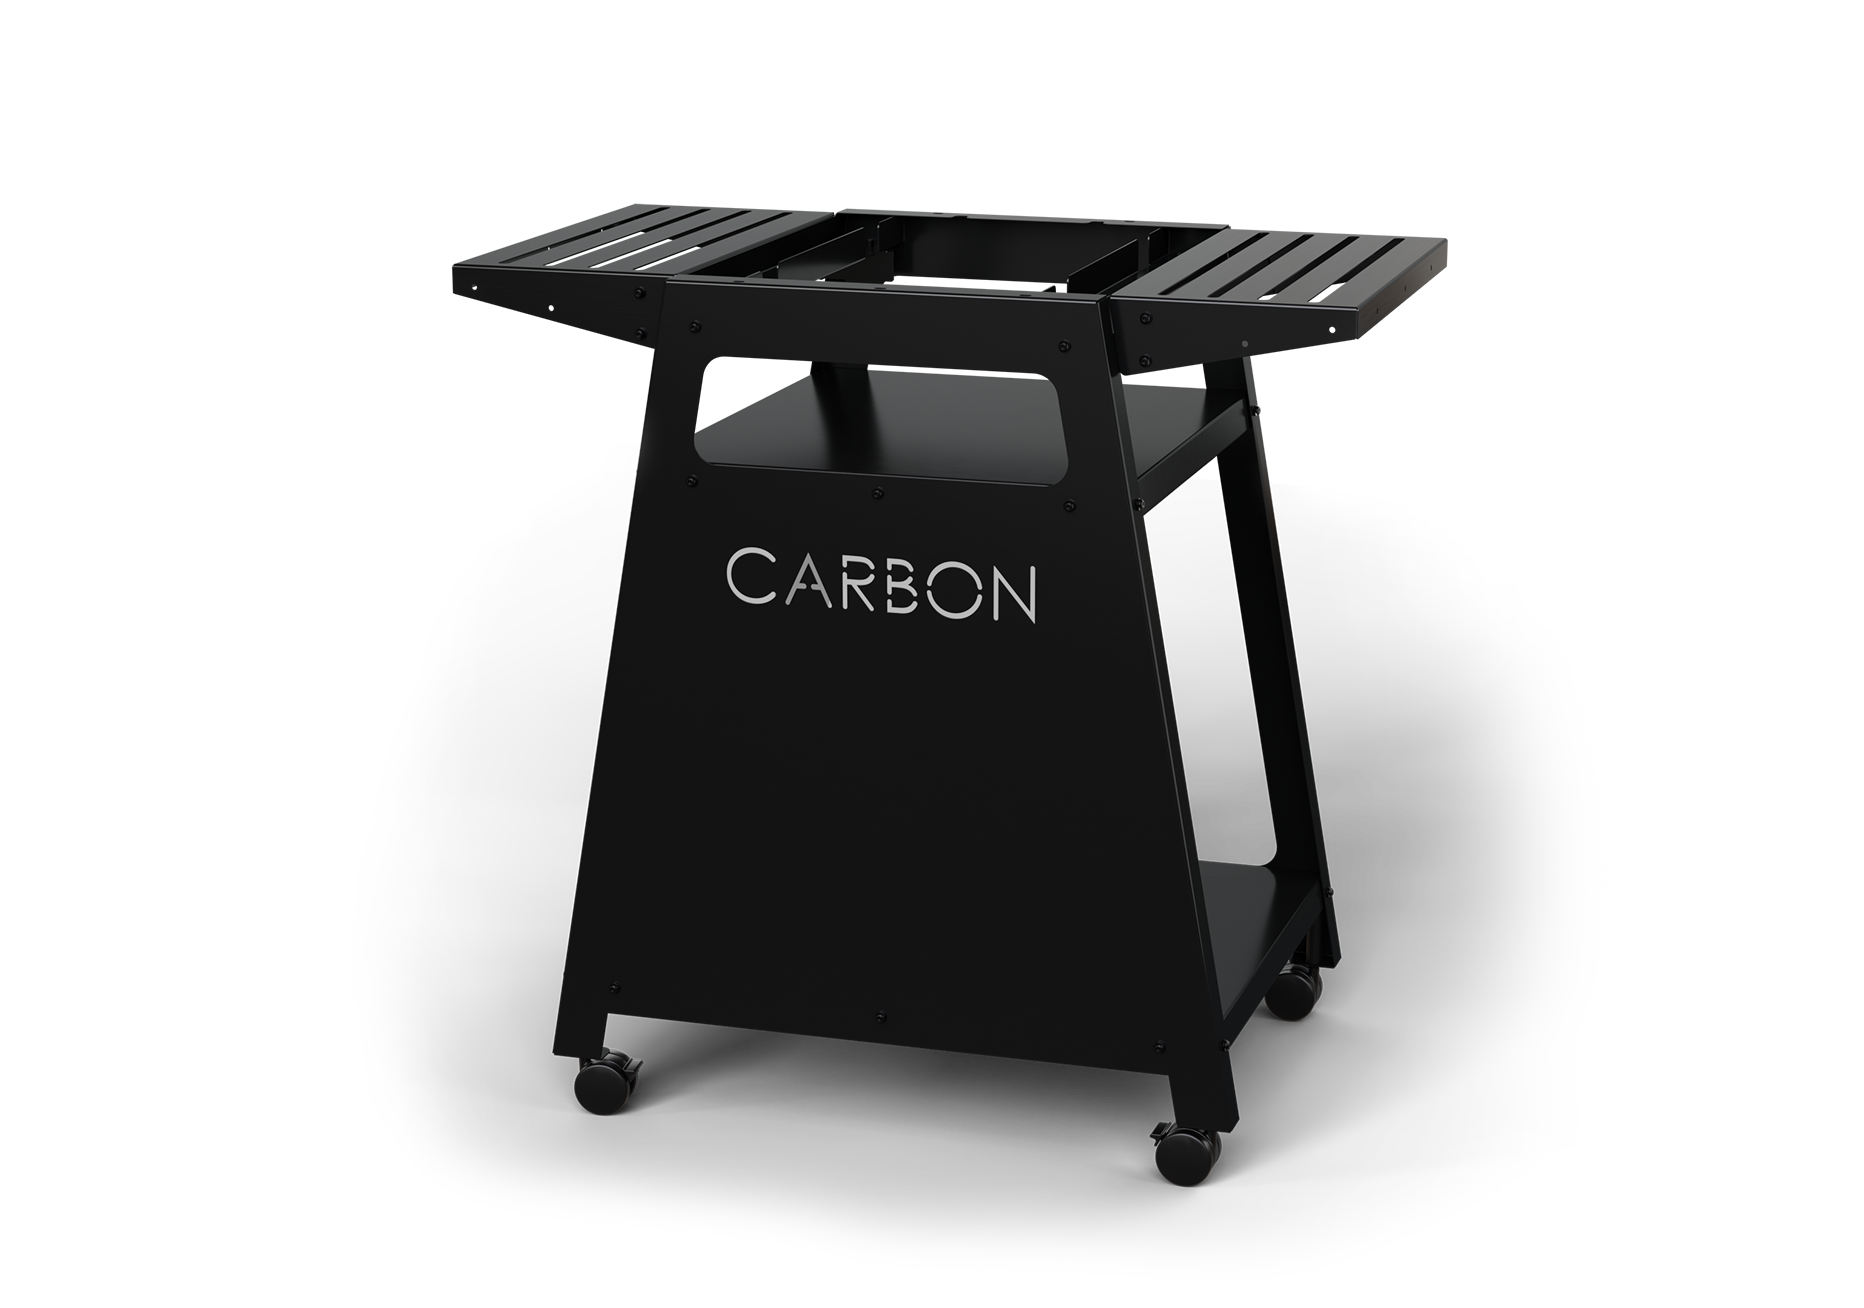 Carbon Gas-Powered Outdoor Pizza Oven - Carbon Pizza Ovens